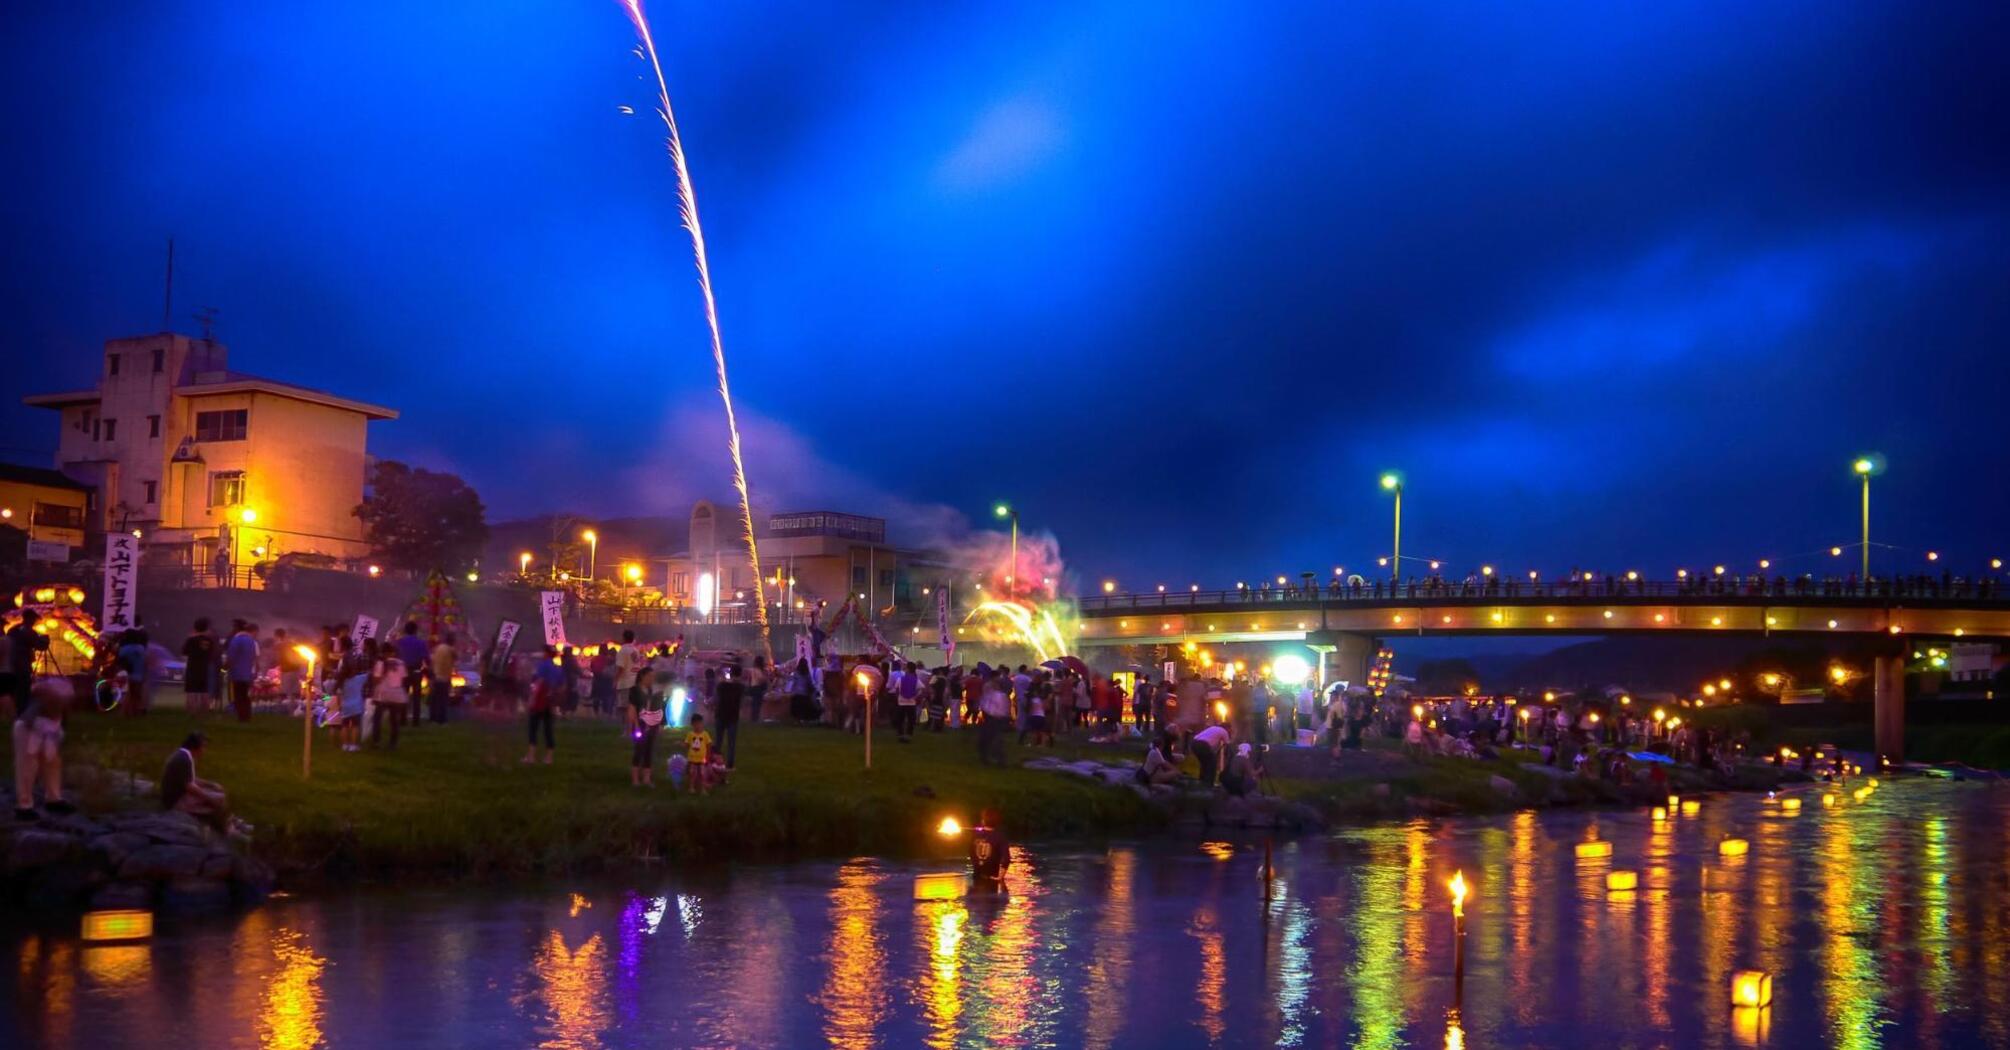 Night Festival by the River